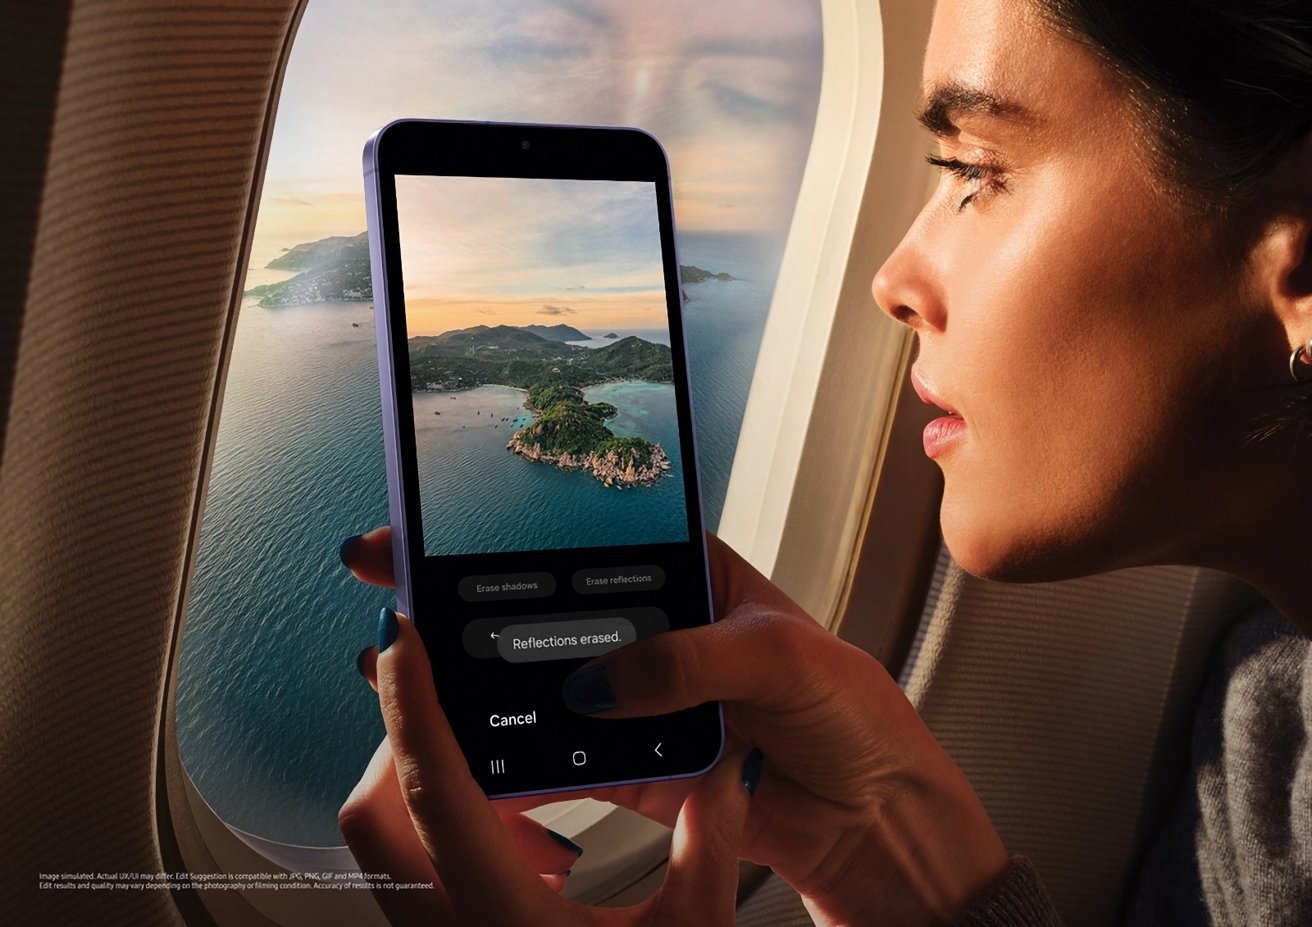 A woman peers intently at her phone, which displays a picturesque coastal landscape, seemingly captured from the airplane window beside her.